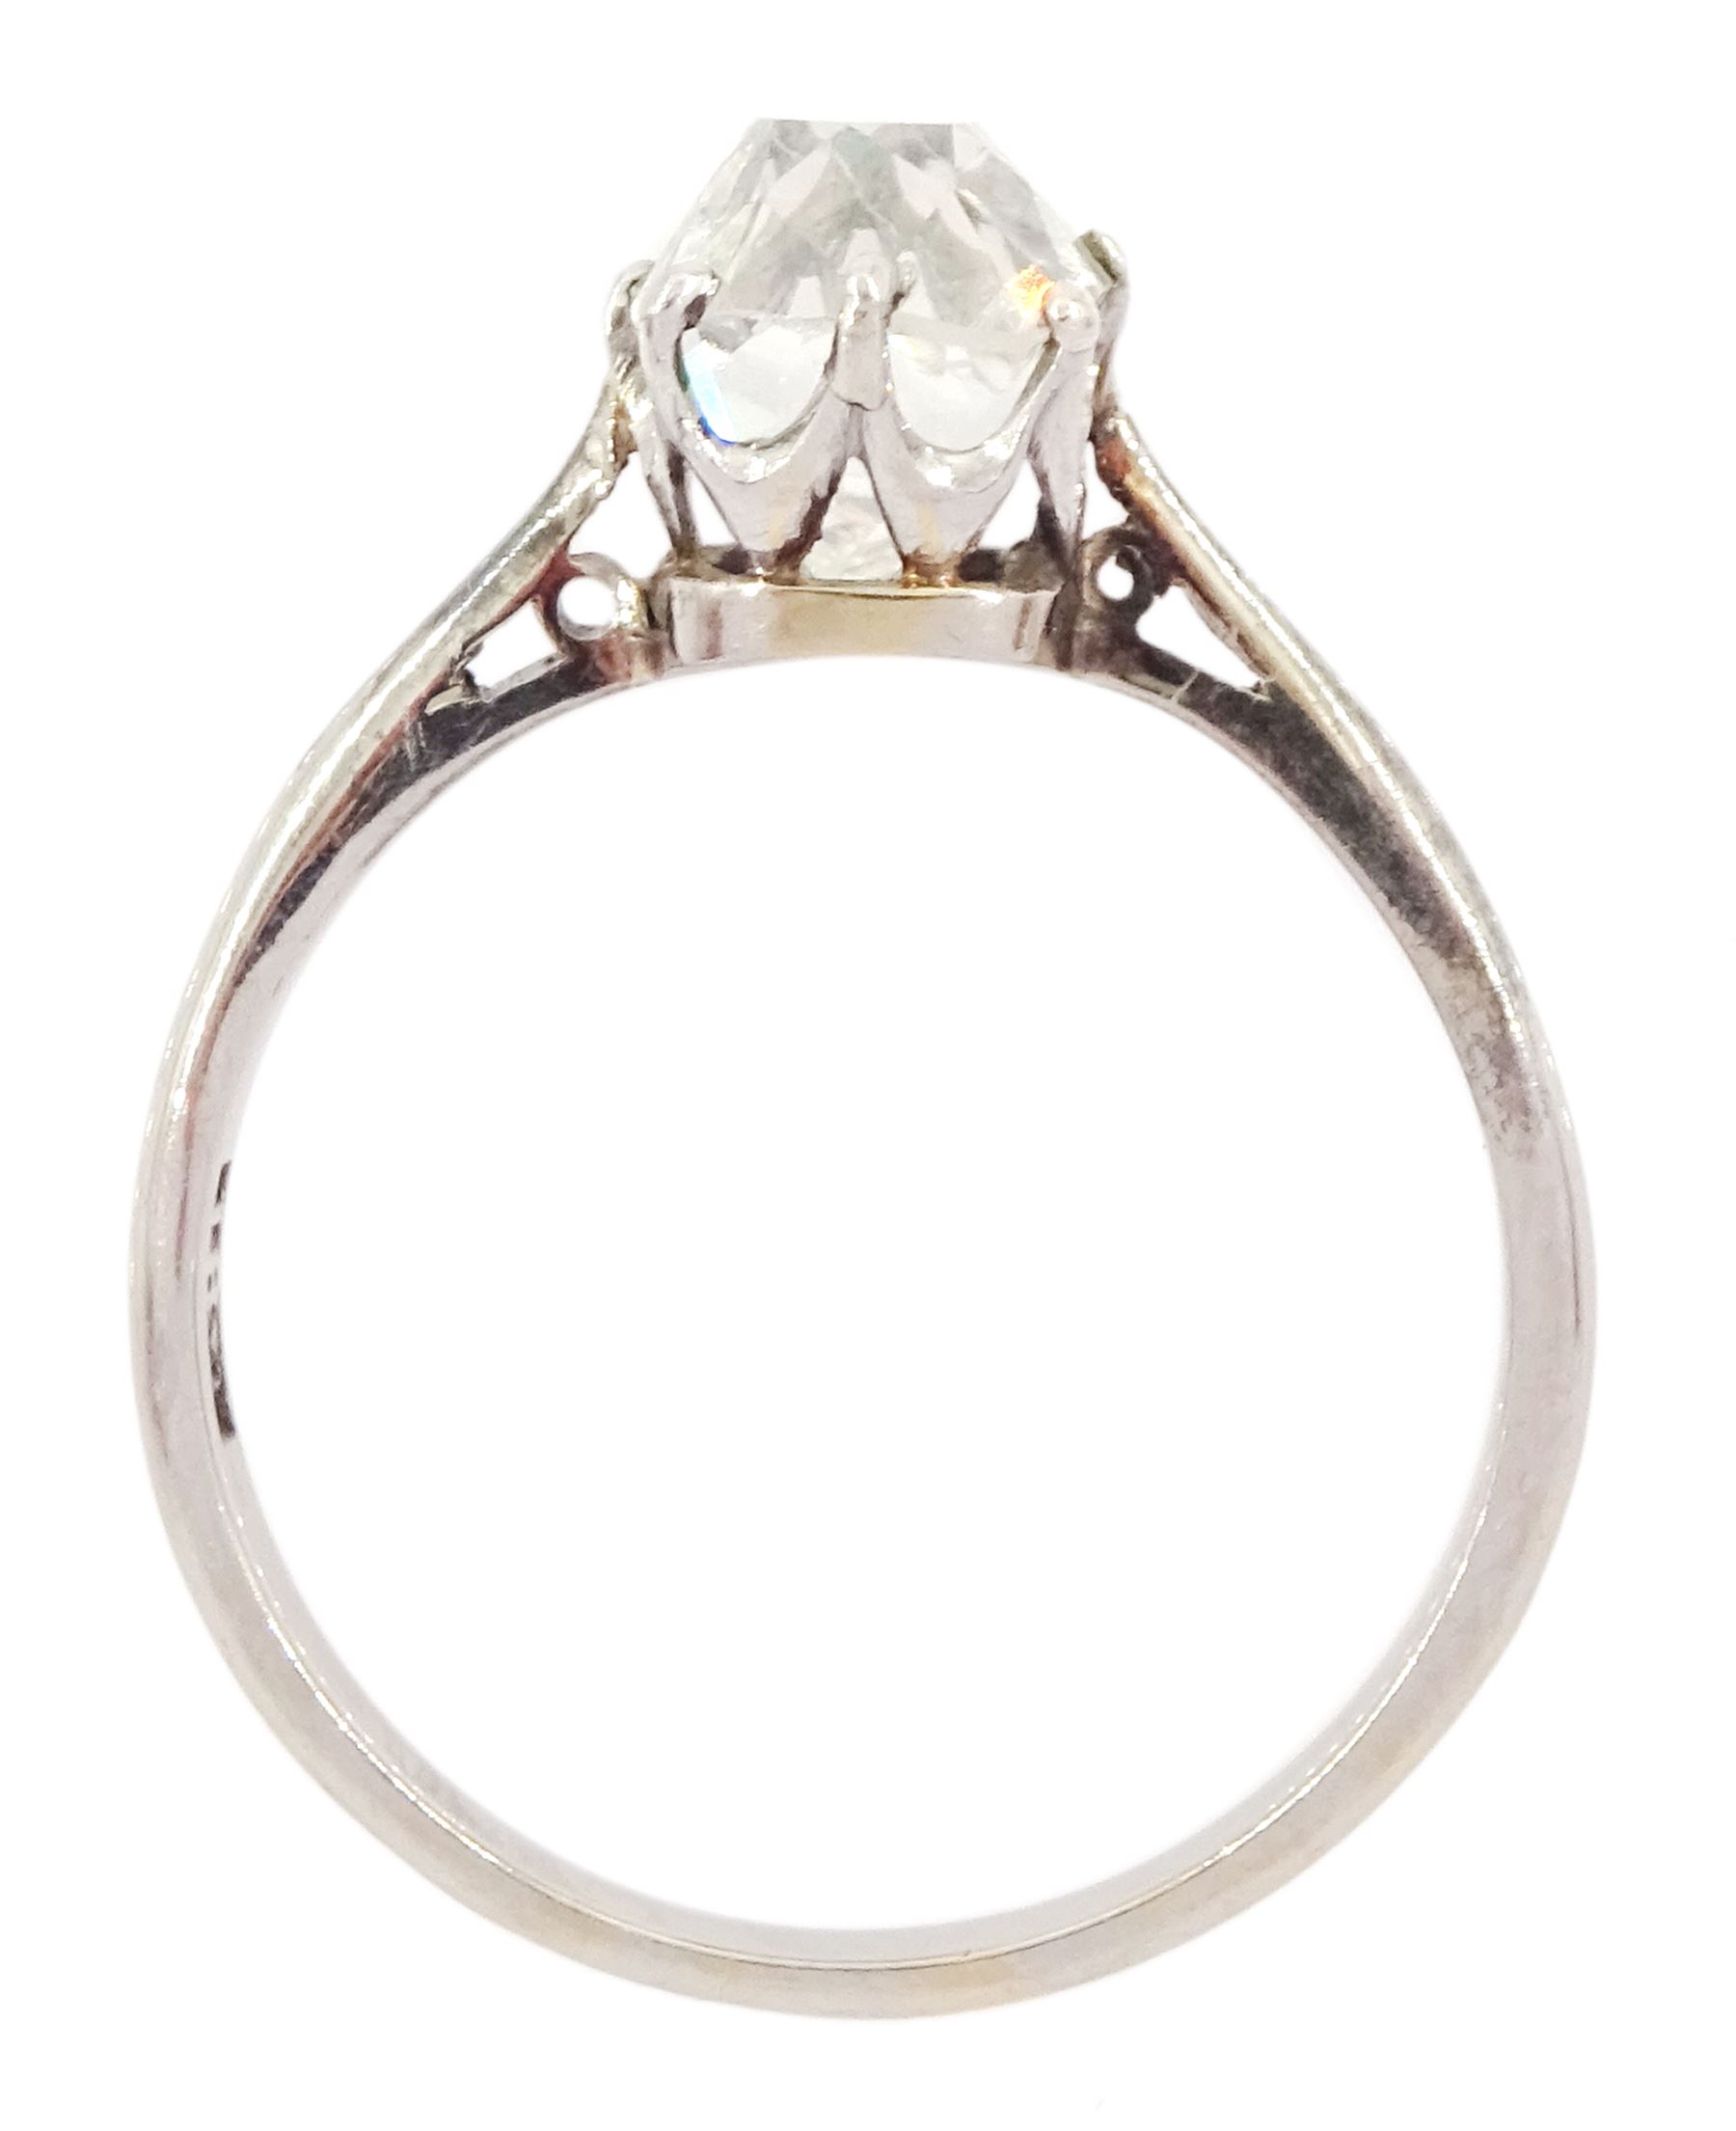 Early 20th century white gold and platinum single stone cushion cut diamond ring - Image 4 of 4